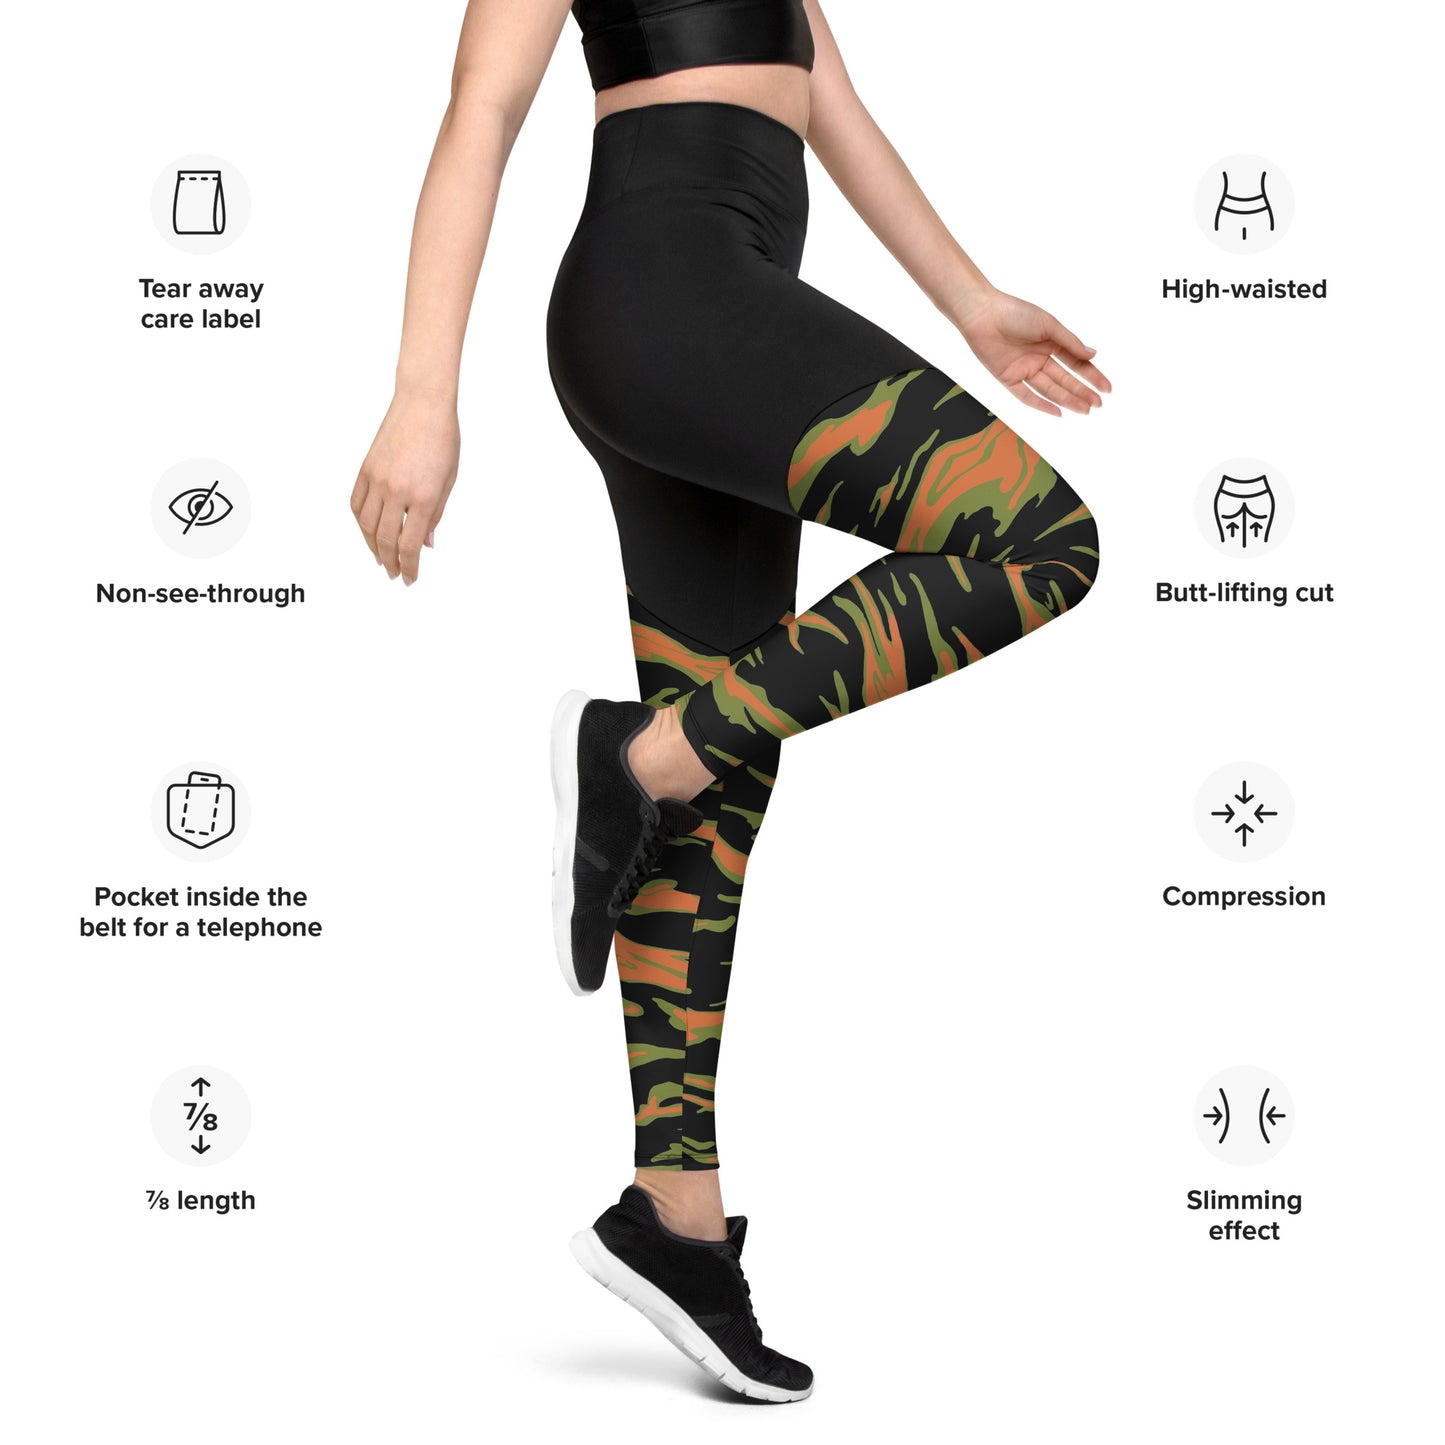 Sports Leggings "Tiger Style Edition"